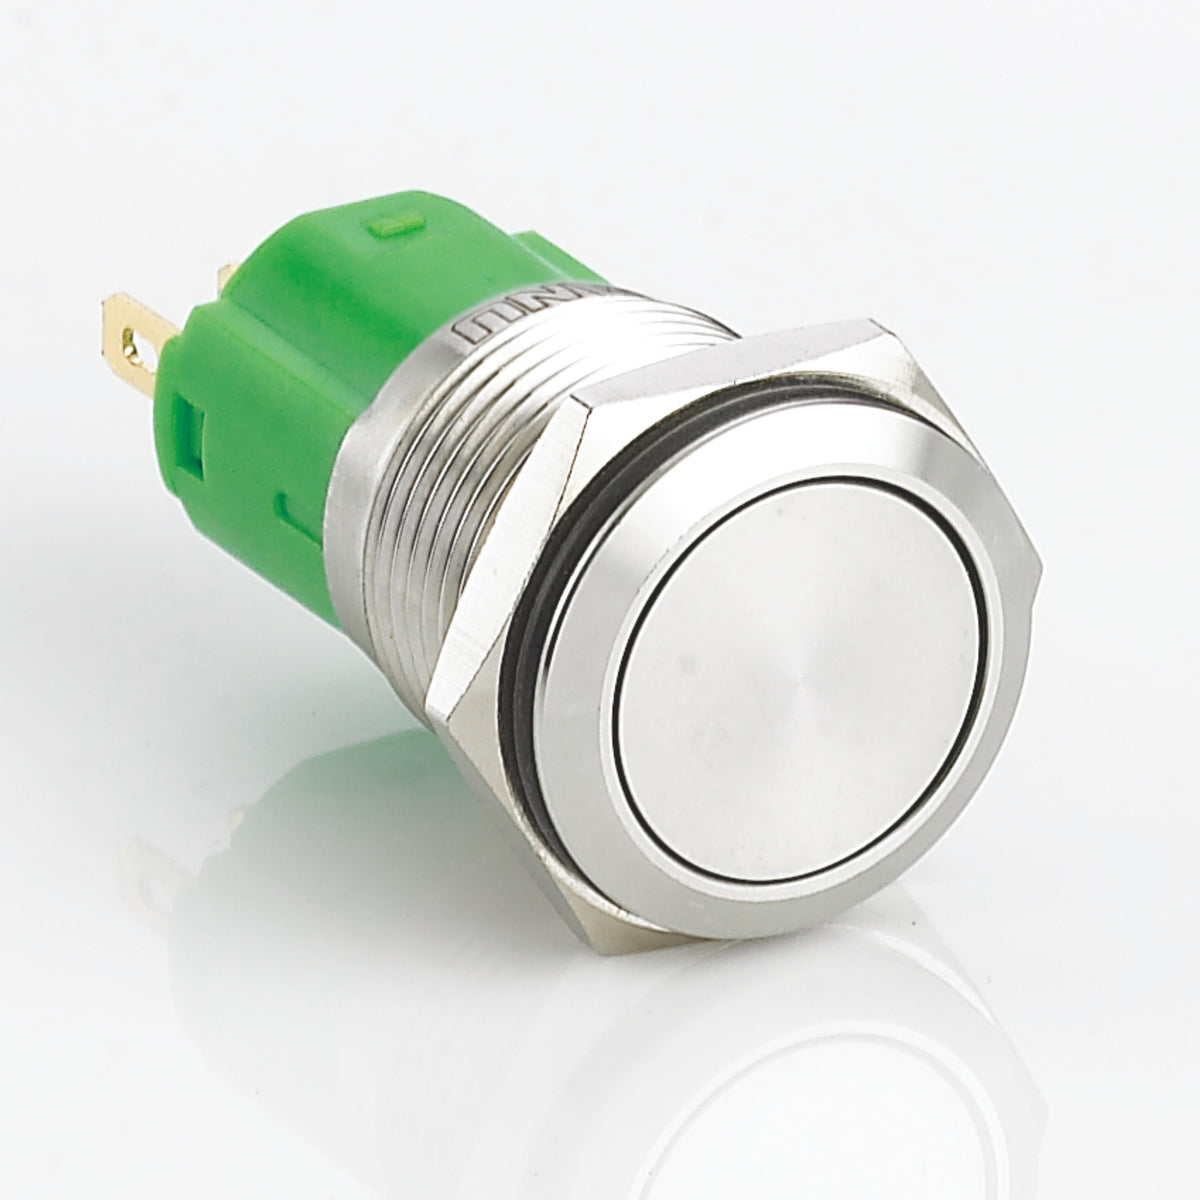 16mm Metal Push Button Switch Momentary Flat Head Stainless Steel Soldering Pin 1 Normally-Open and 1 Normally-Closed